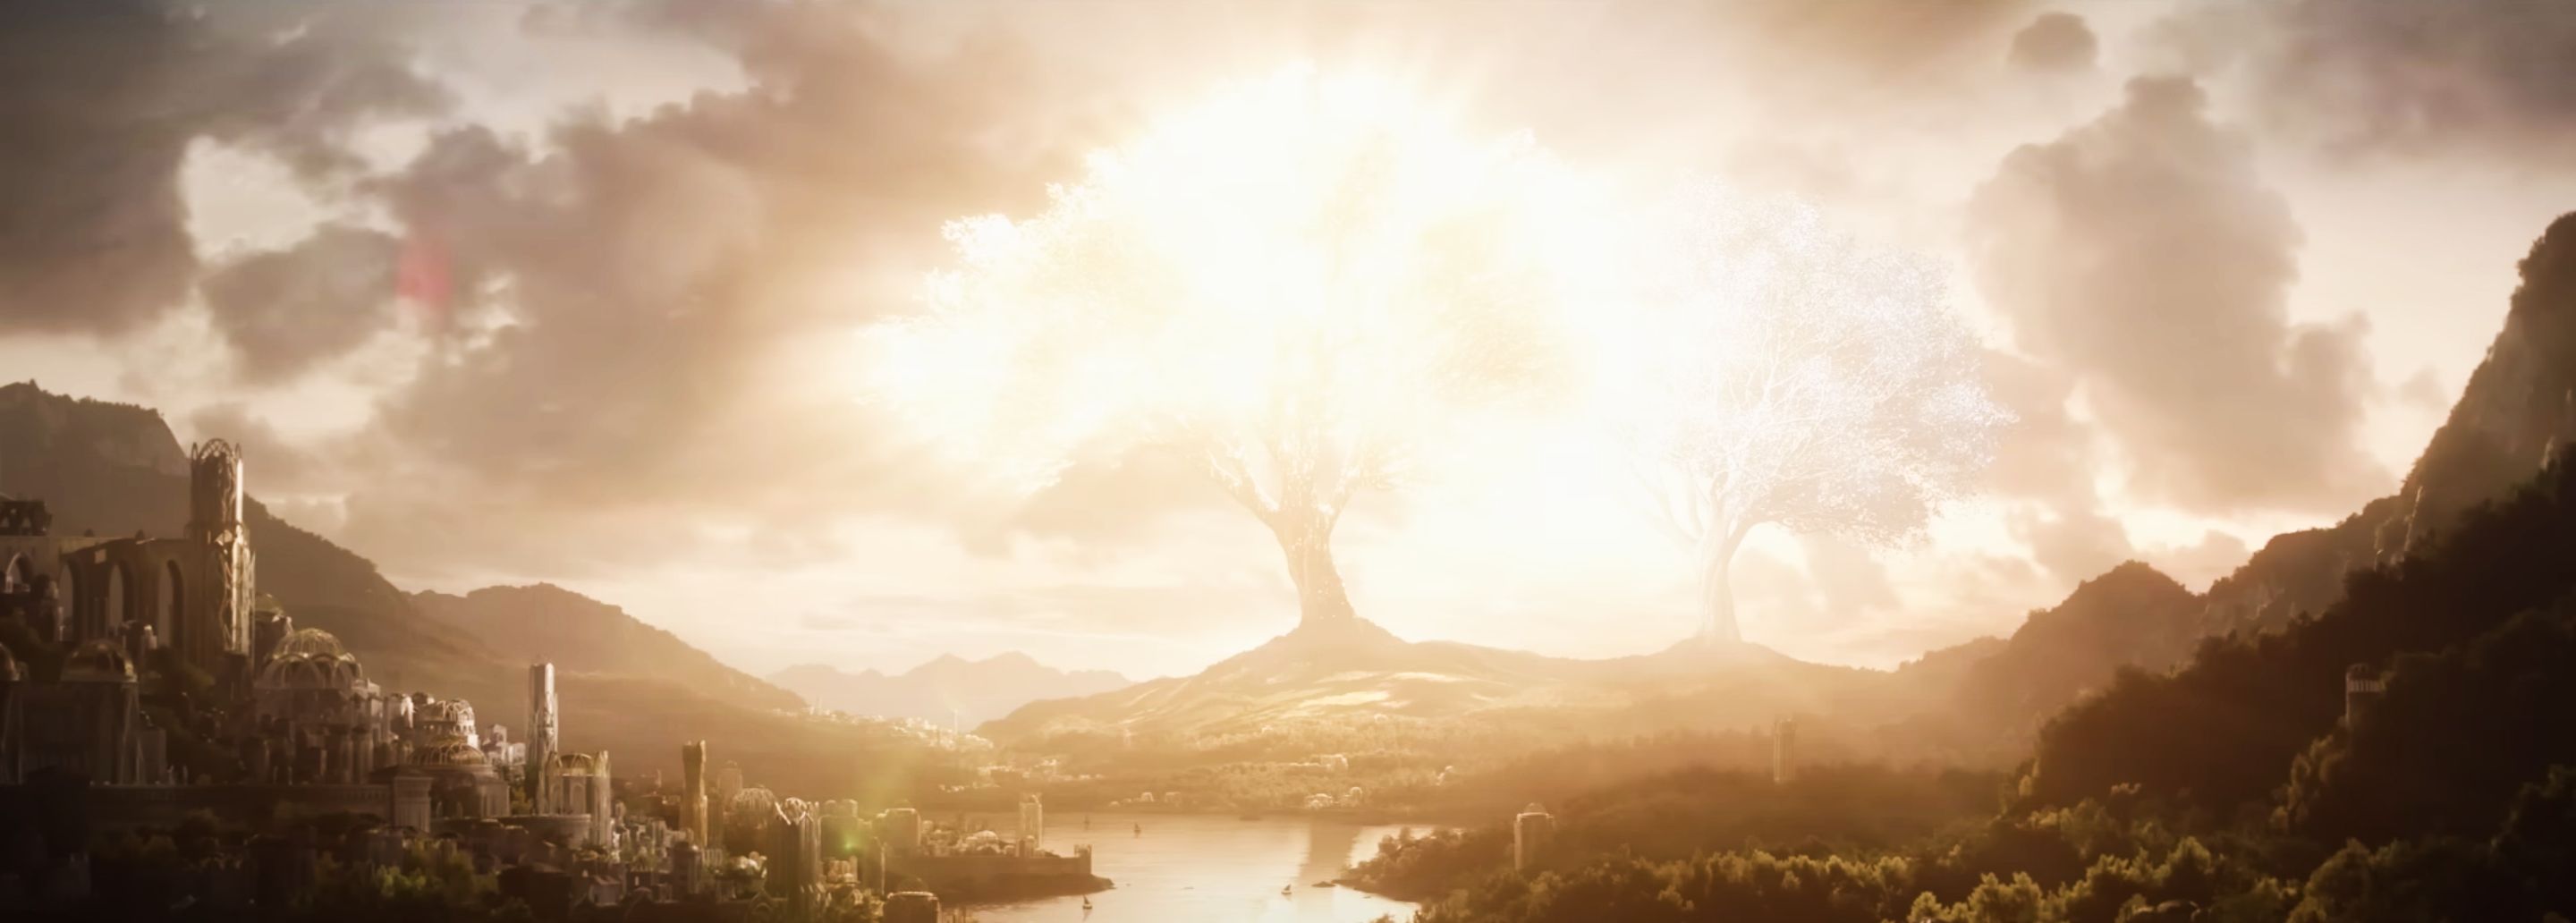 lord-of-the-rings-rings-of-power-trailer-trees-valinor